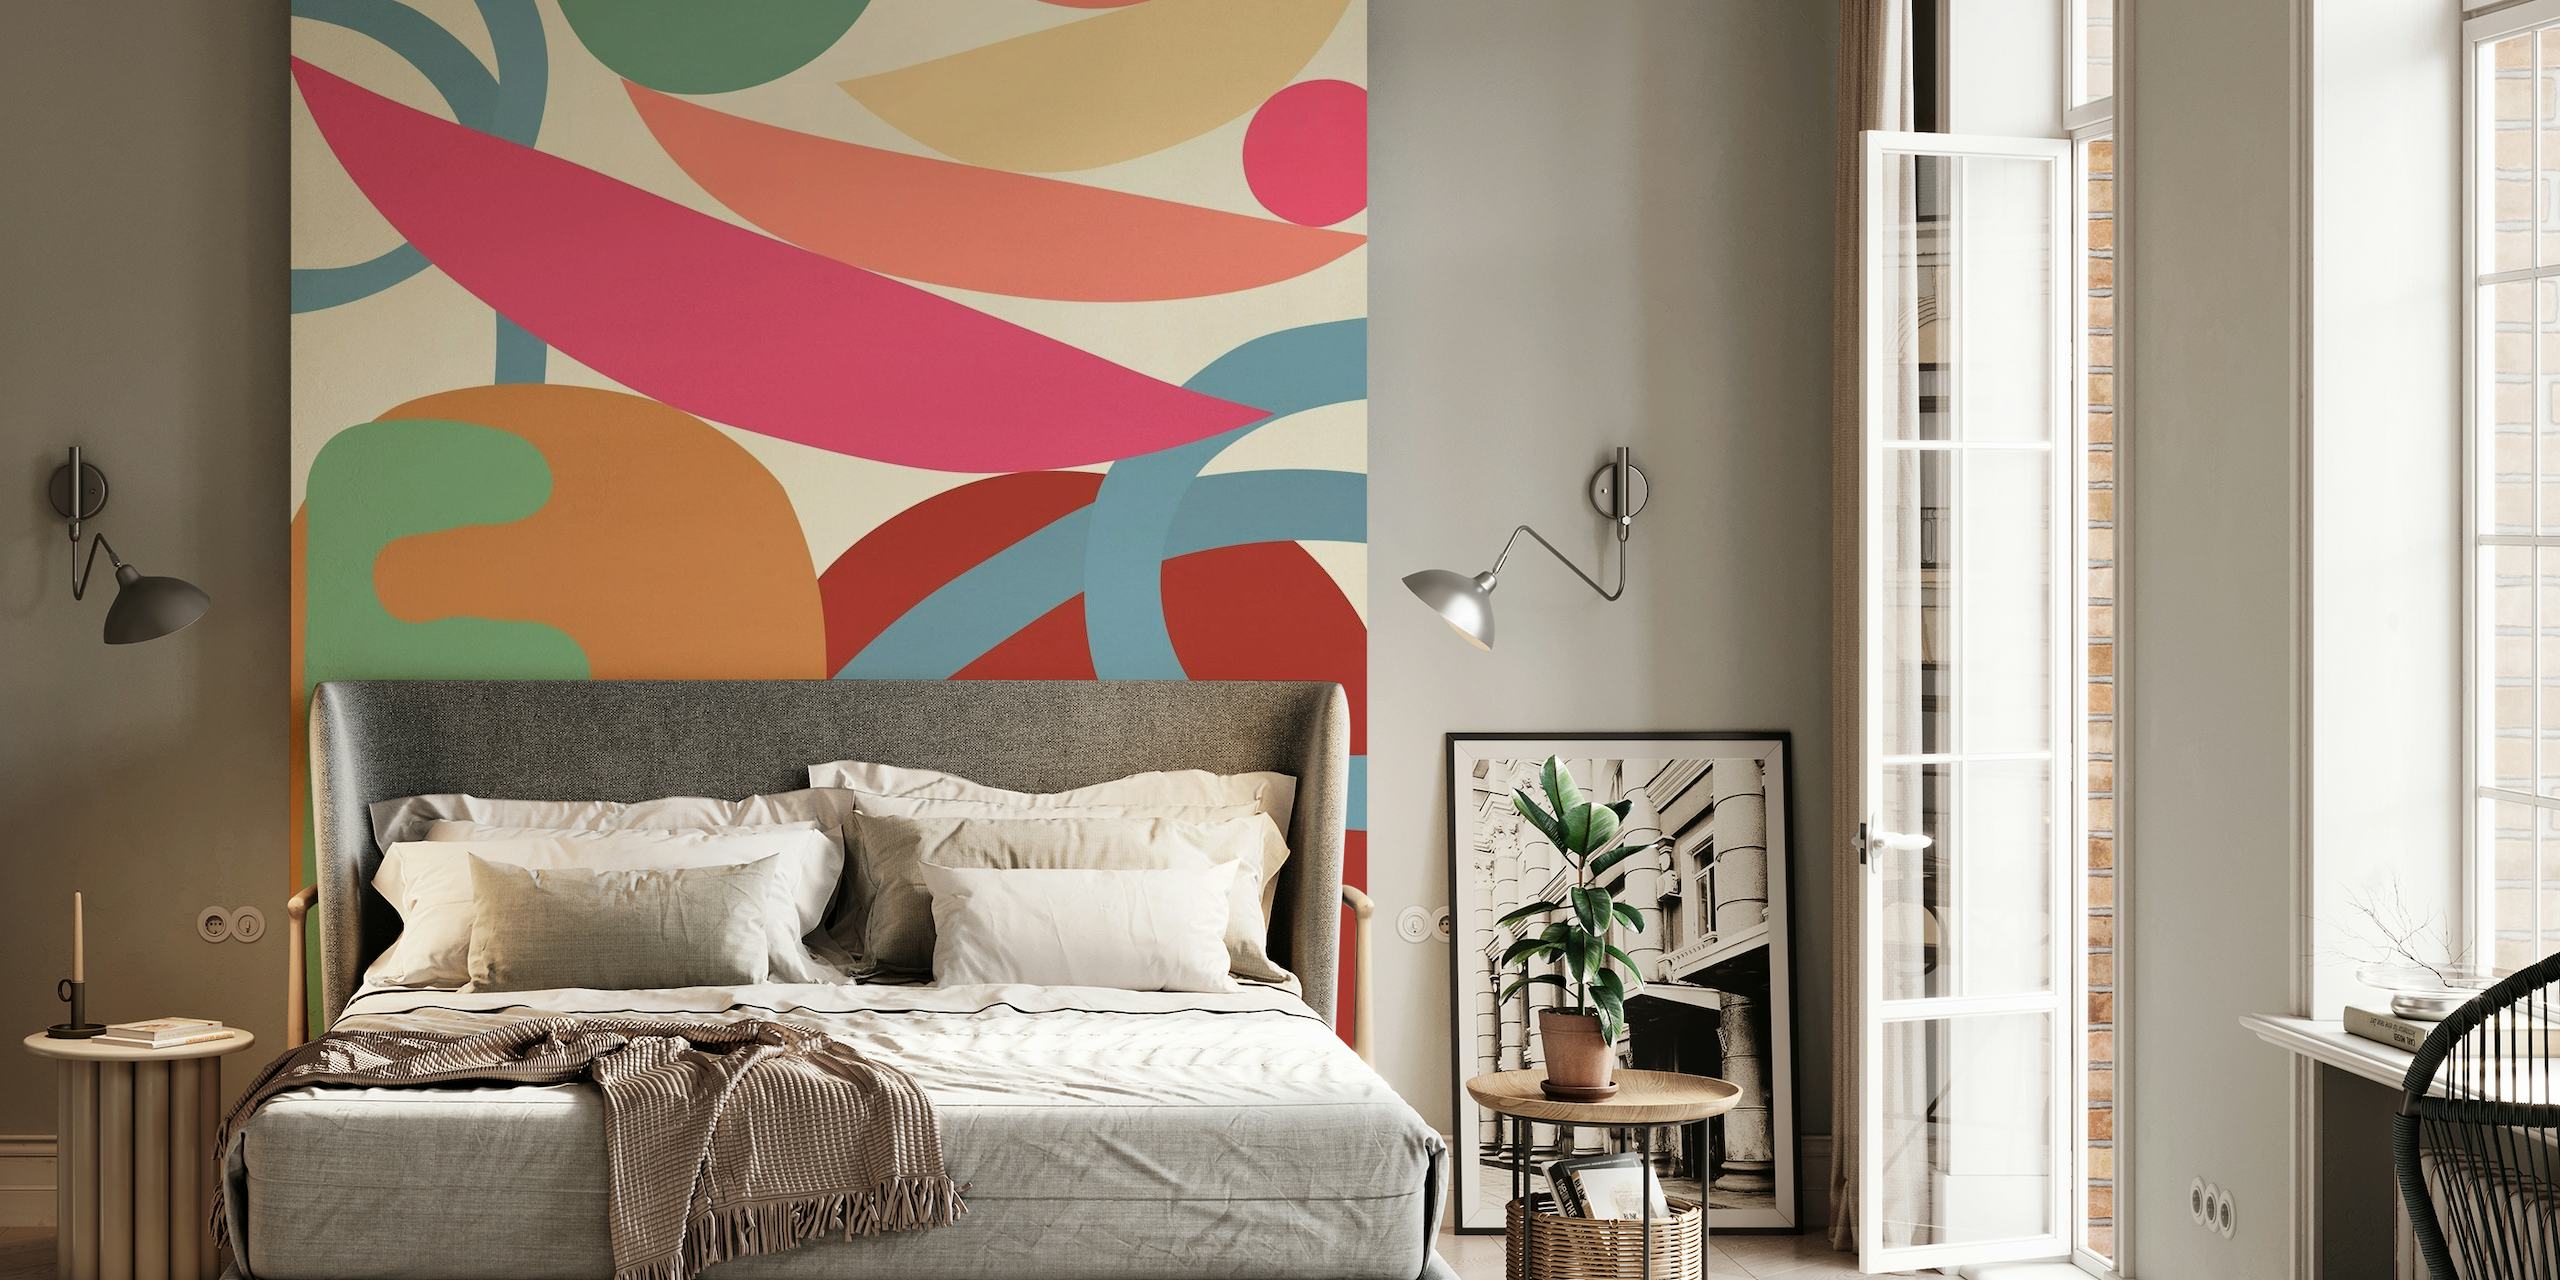 Abstract organic shapes wall mural with a mix of pastel and bold colors suitable for modern interior decor